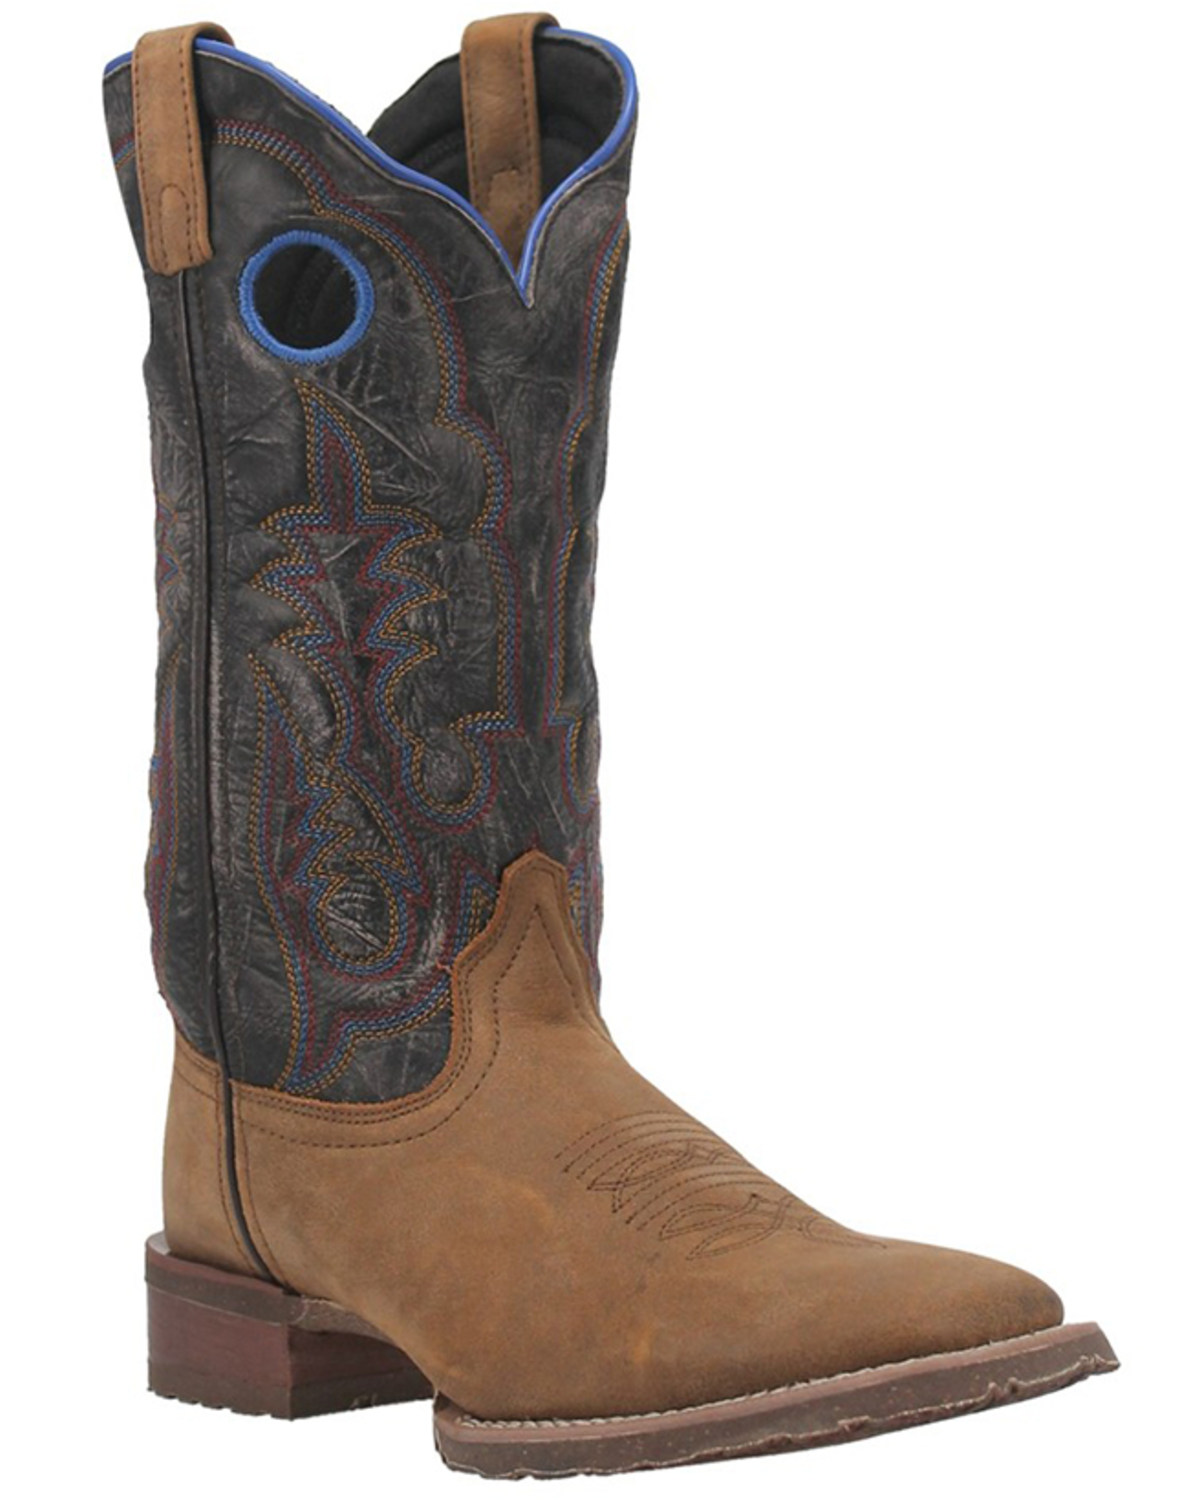 Laredo Men's Isaac Distressed Western Boots - Broad Square Toe